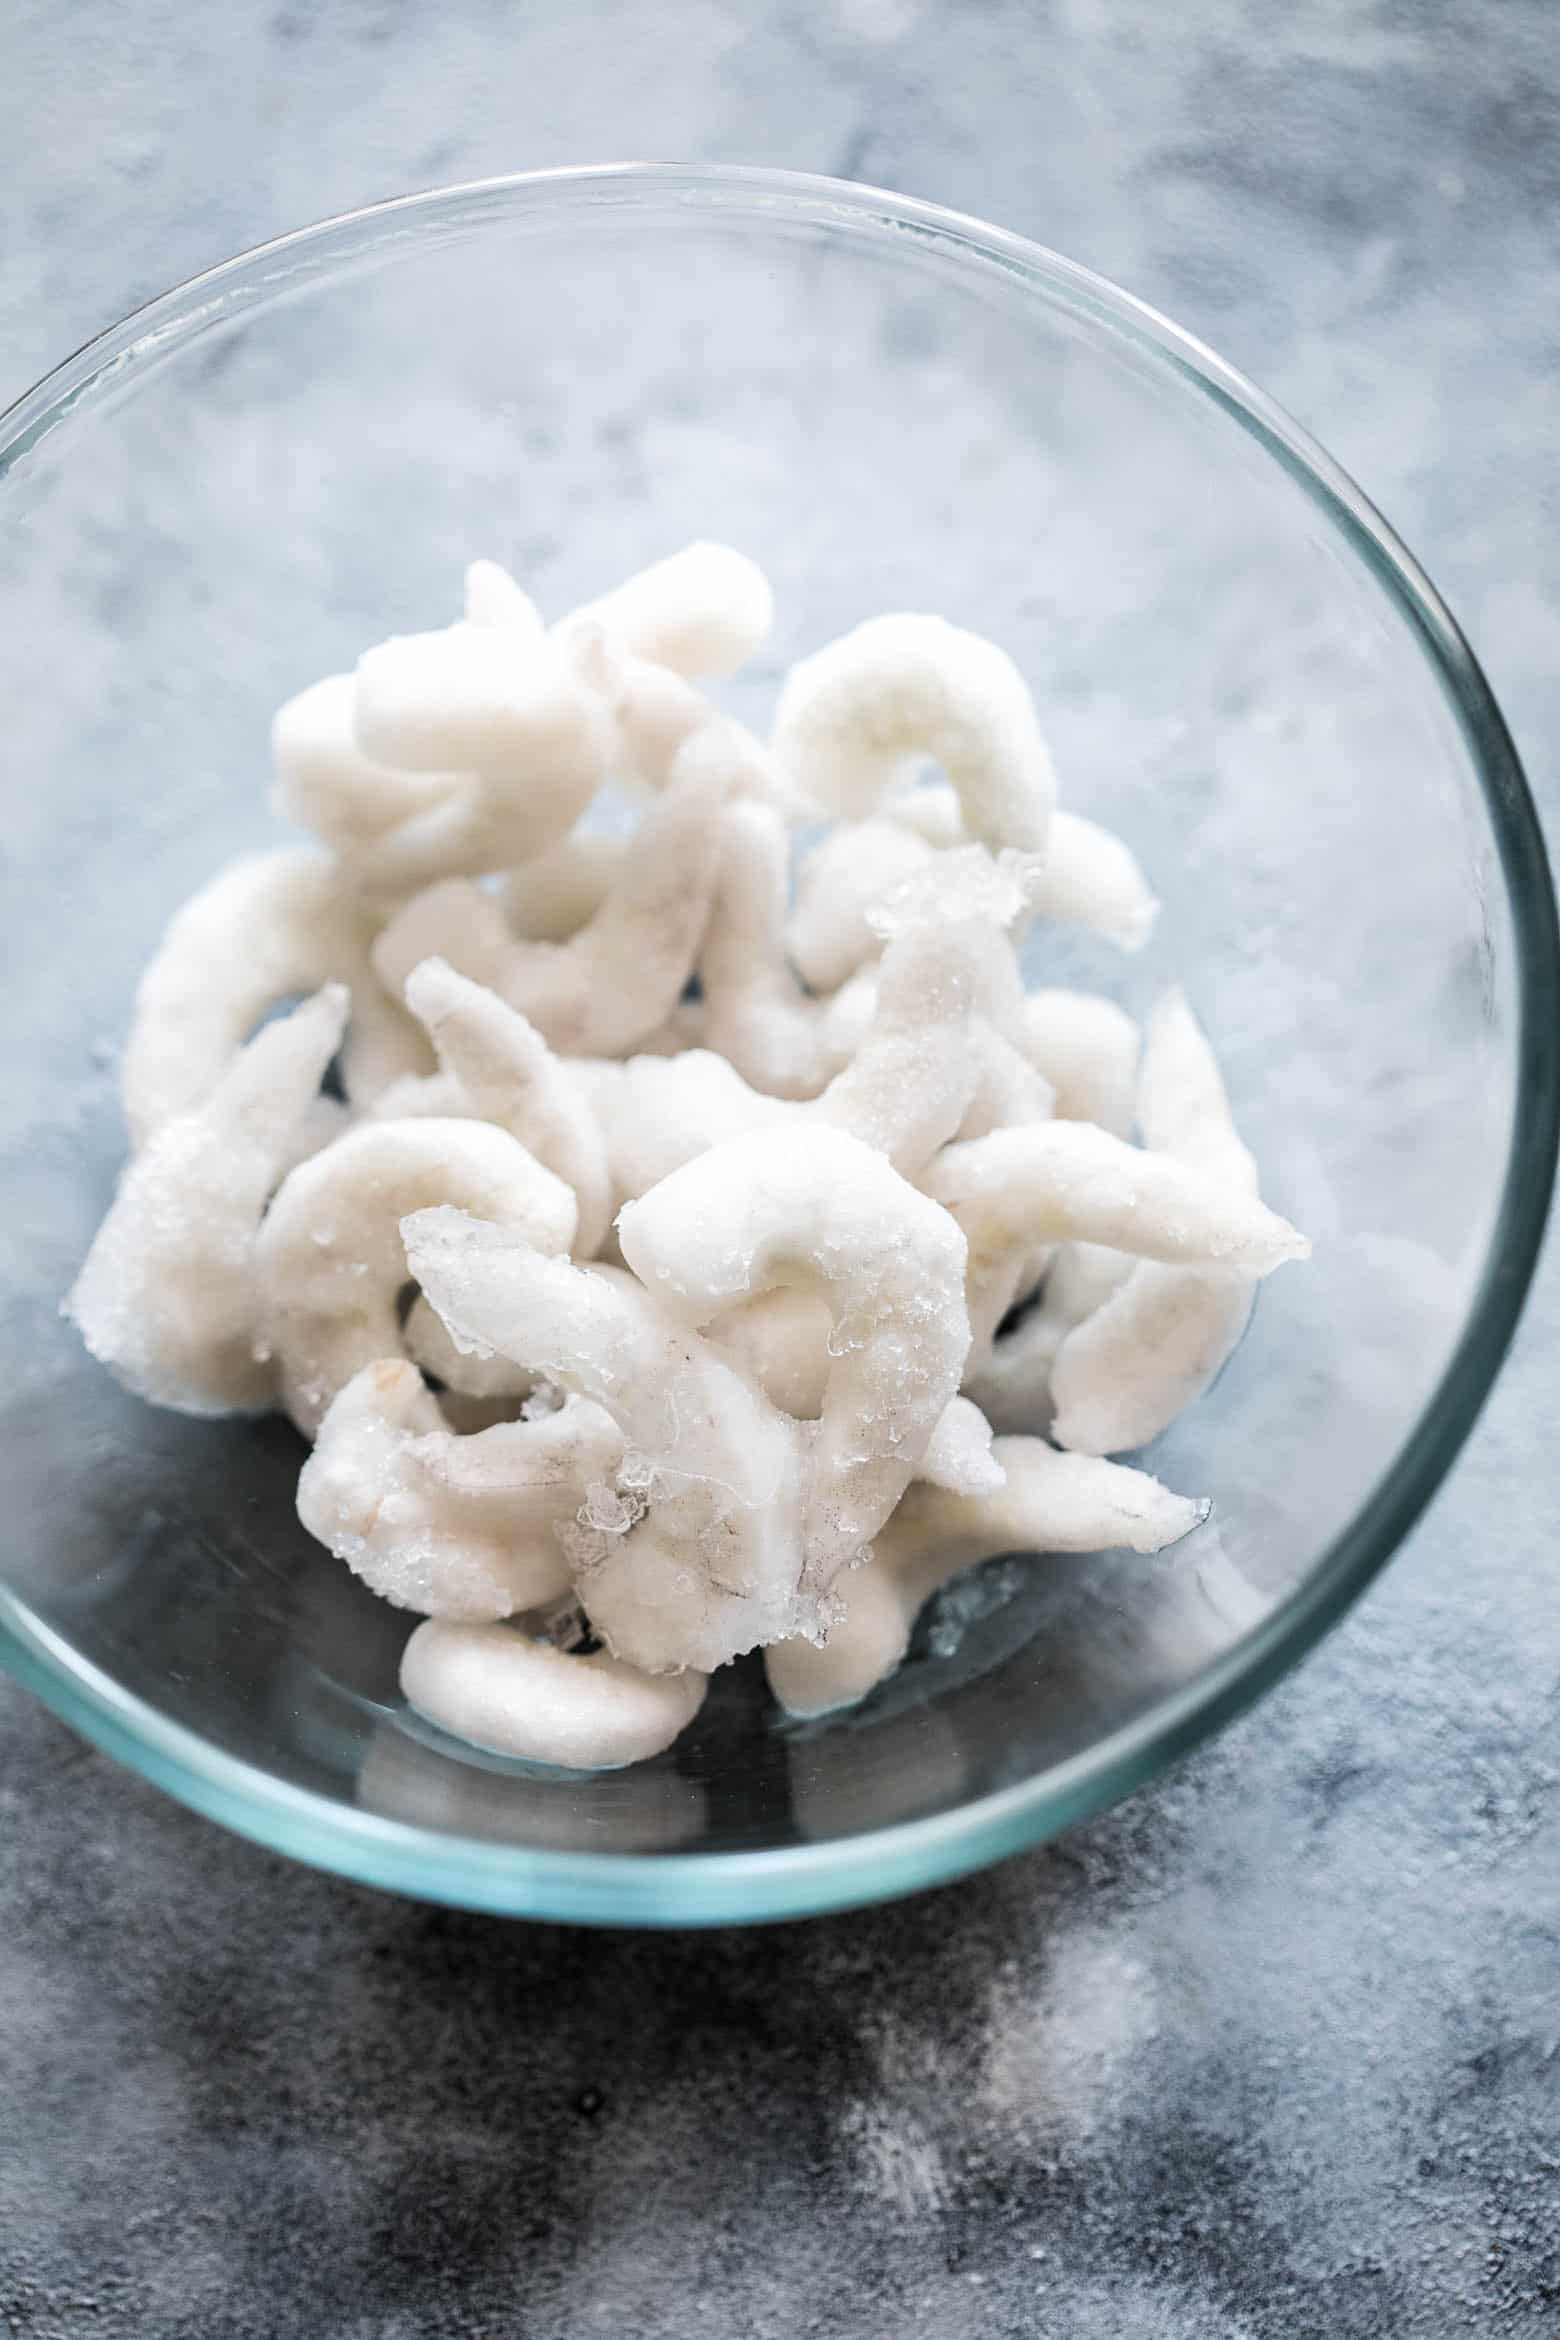 Learn how to defrost prawns safely with four simple methods that are used by chefs and experts. These methods can be used to defrost shrimp, and other seafood as well.